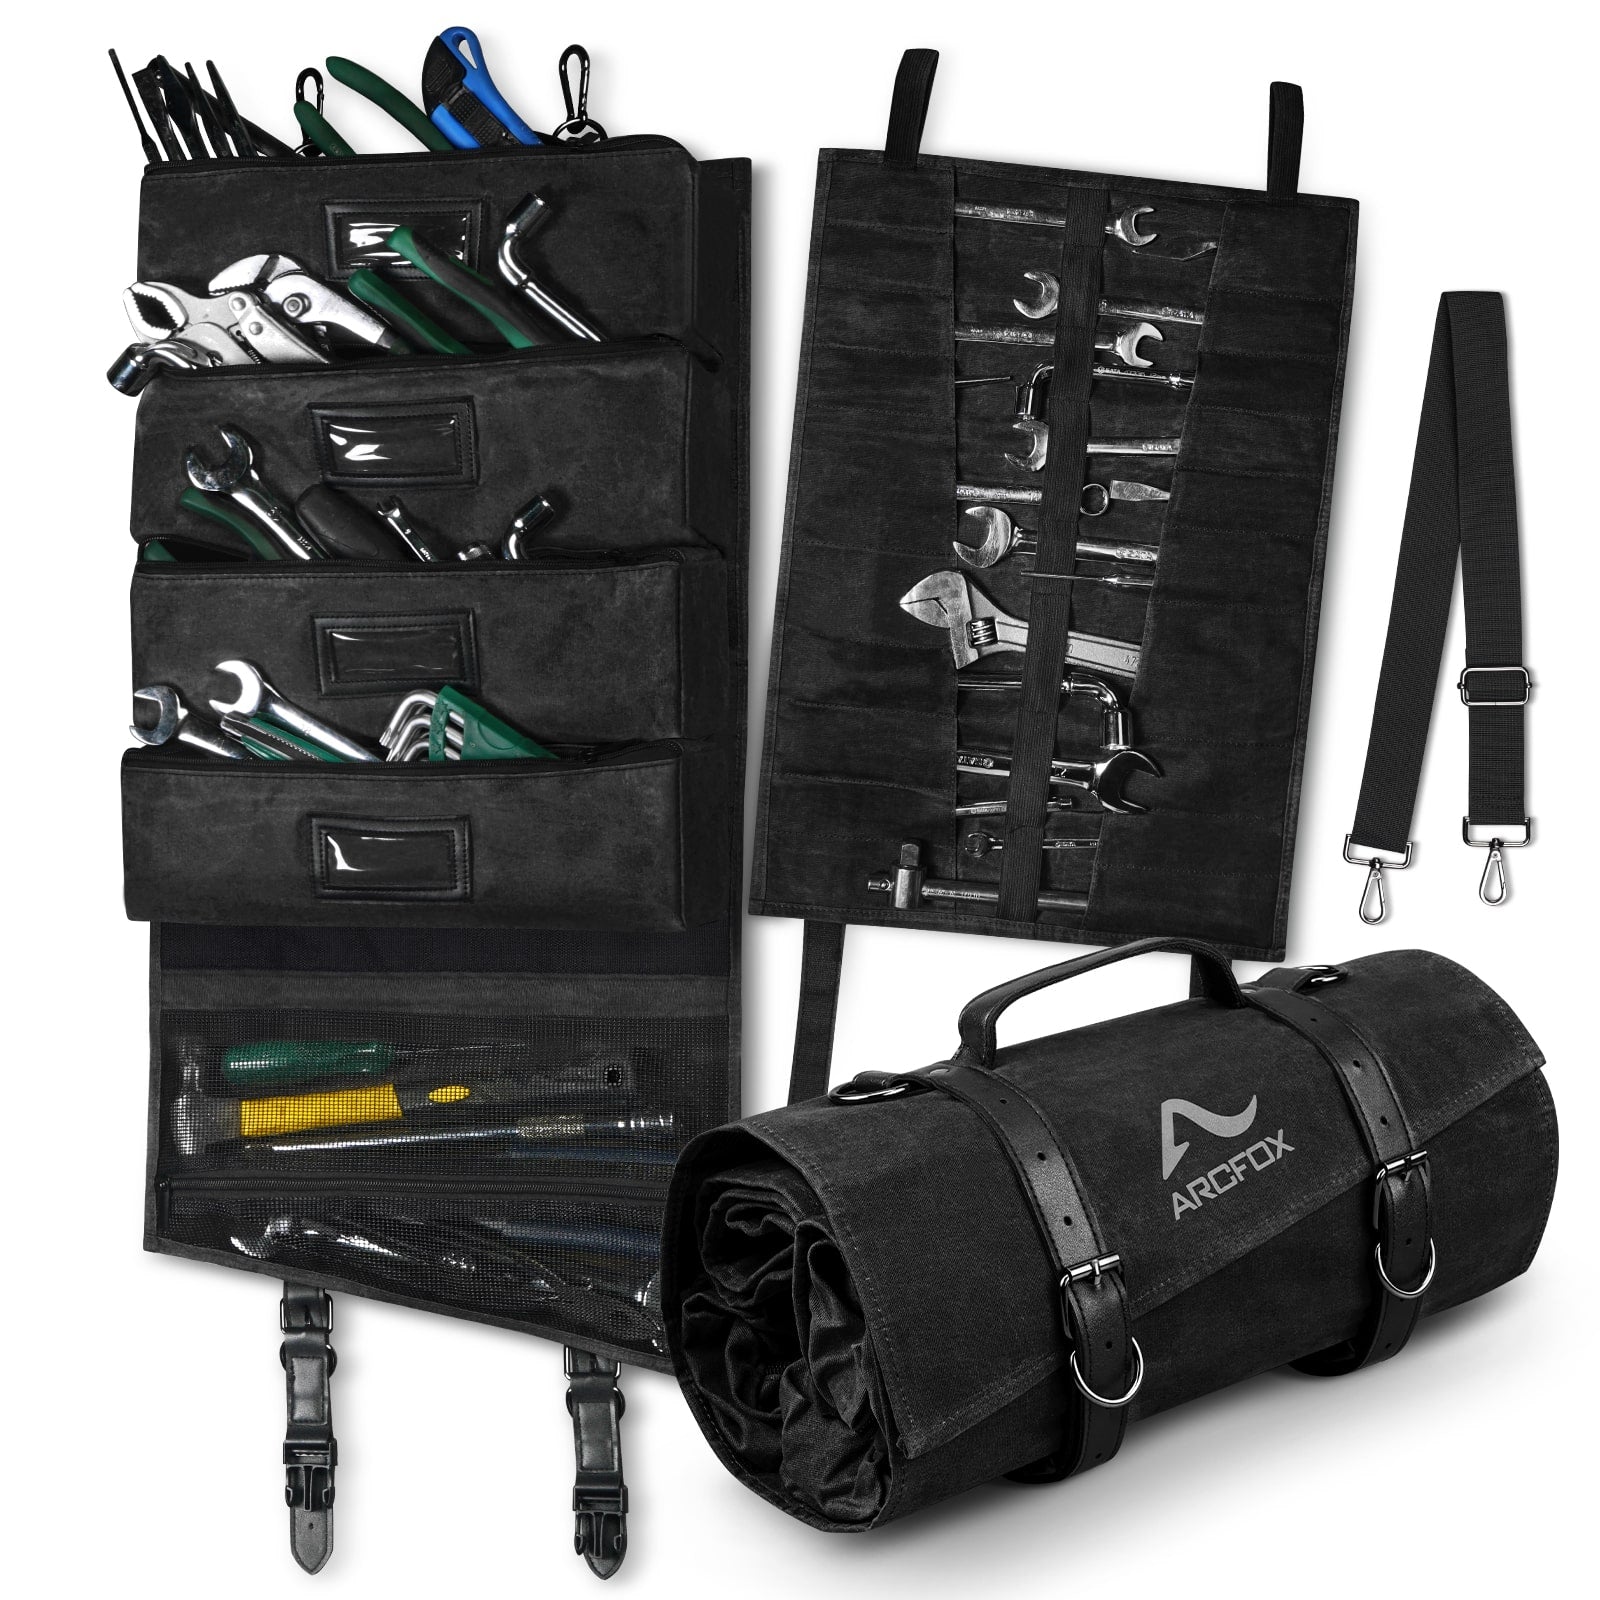 Tool Roll Up Bag Heavy Duty Oil Waxed Canvas Organizer with 5 Detachable Pouches Enlarged Size for Mechanics Electricians